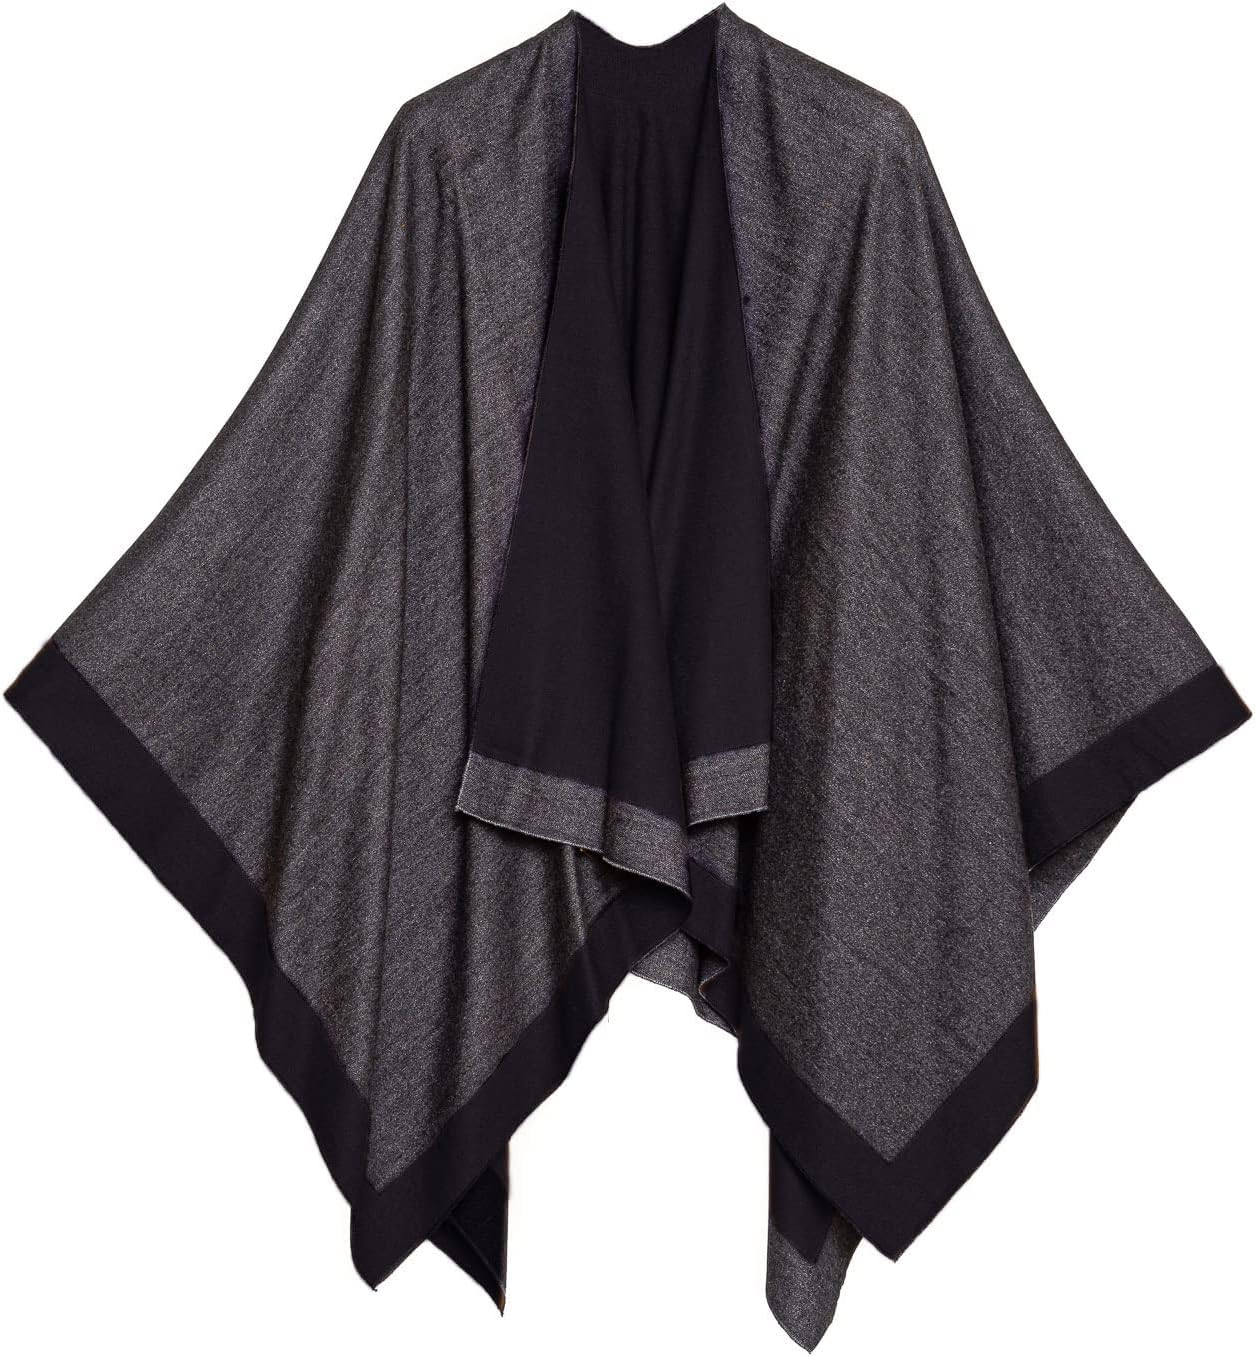 MELIFLUOS DESIGNED IN SPAIN Womens Shawl Wrap Poncho Ruana Cape Cardigan Sweater Open Front for Fall Winter Spring